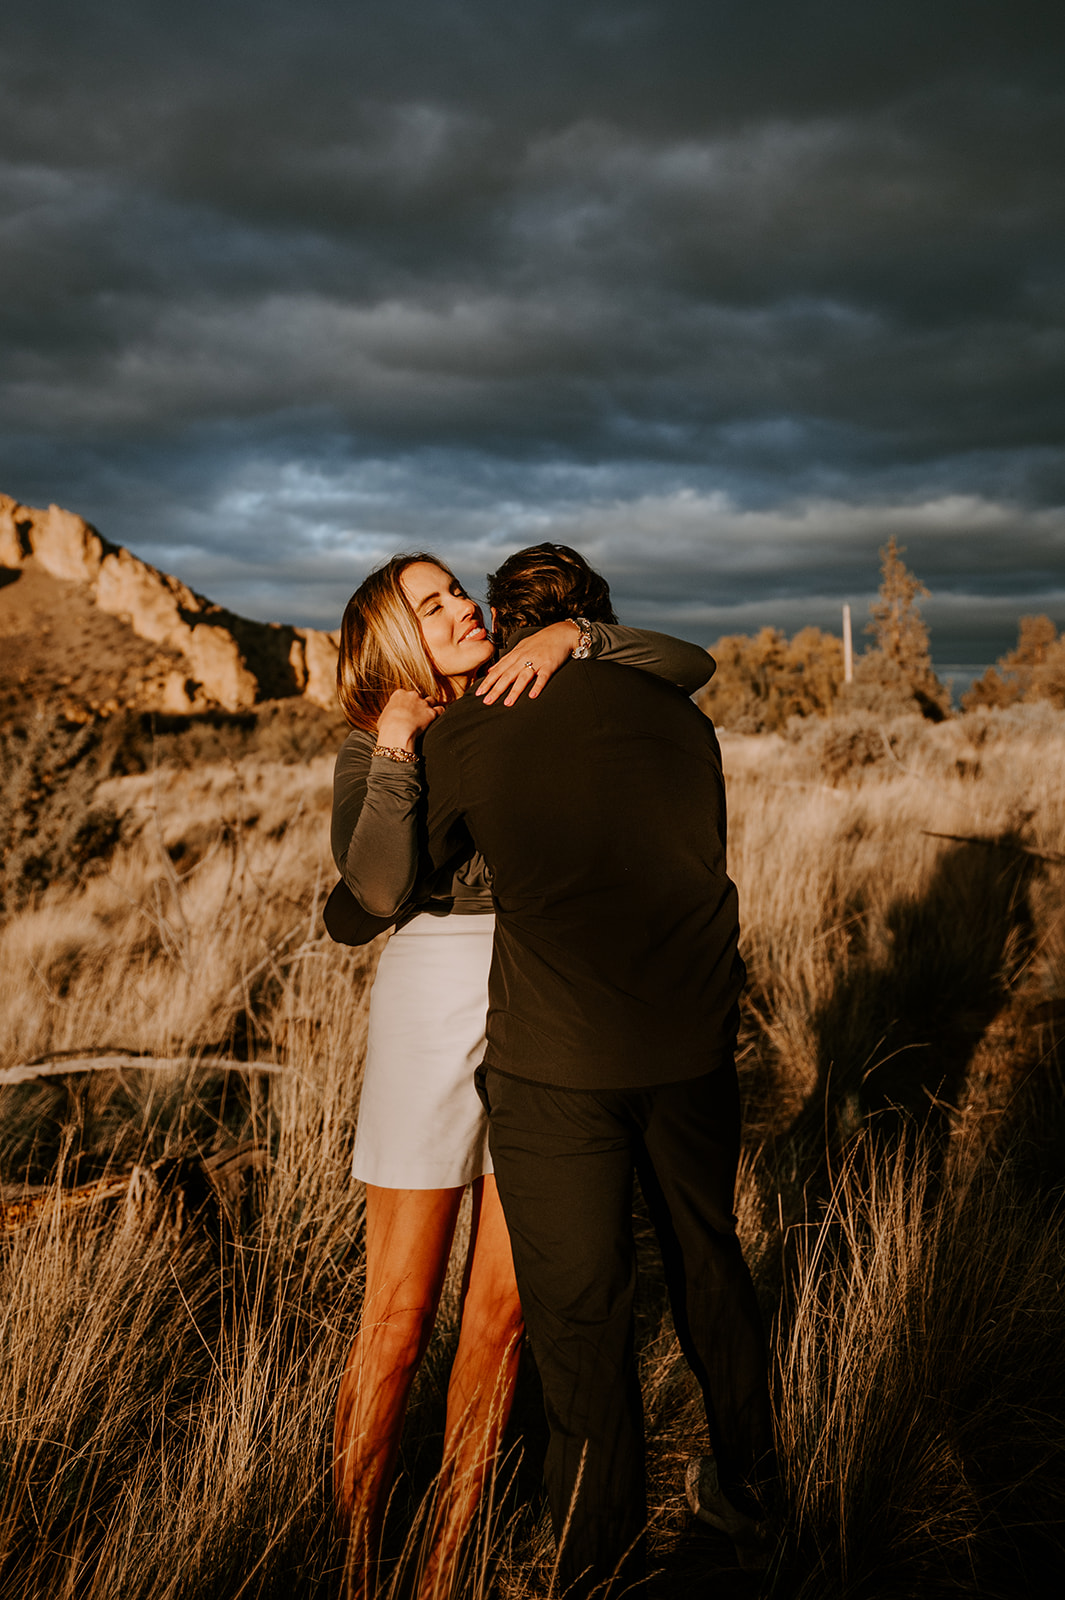 Newly engaged couple embraces with storm clouds overhead at smith rock